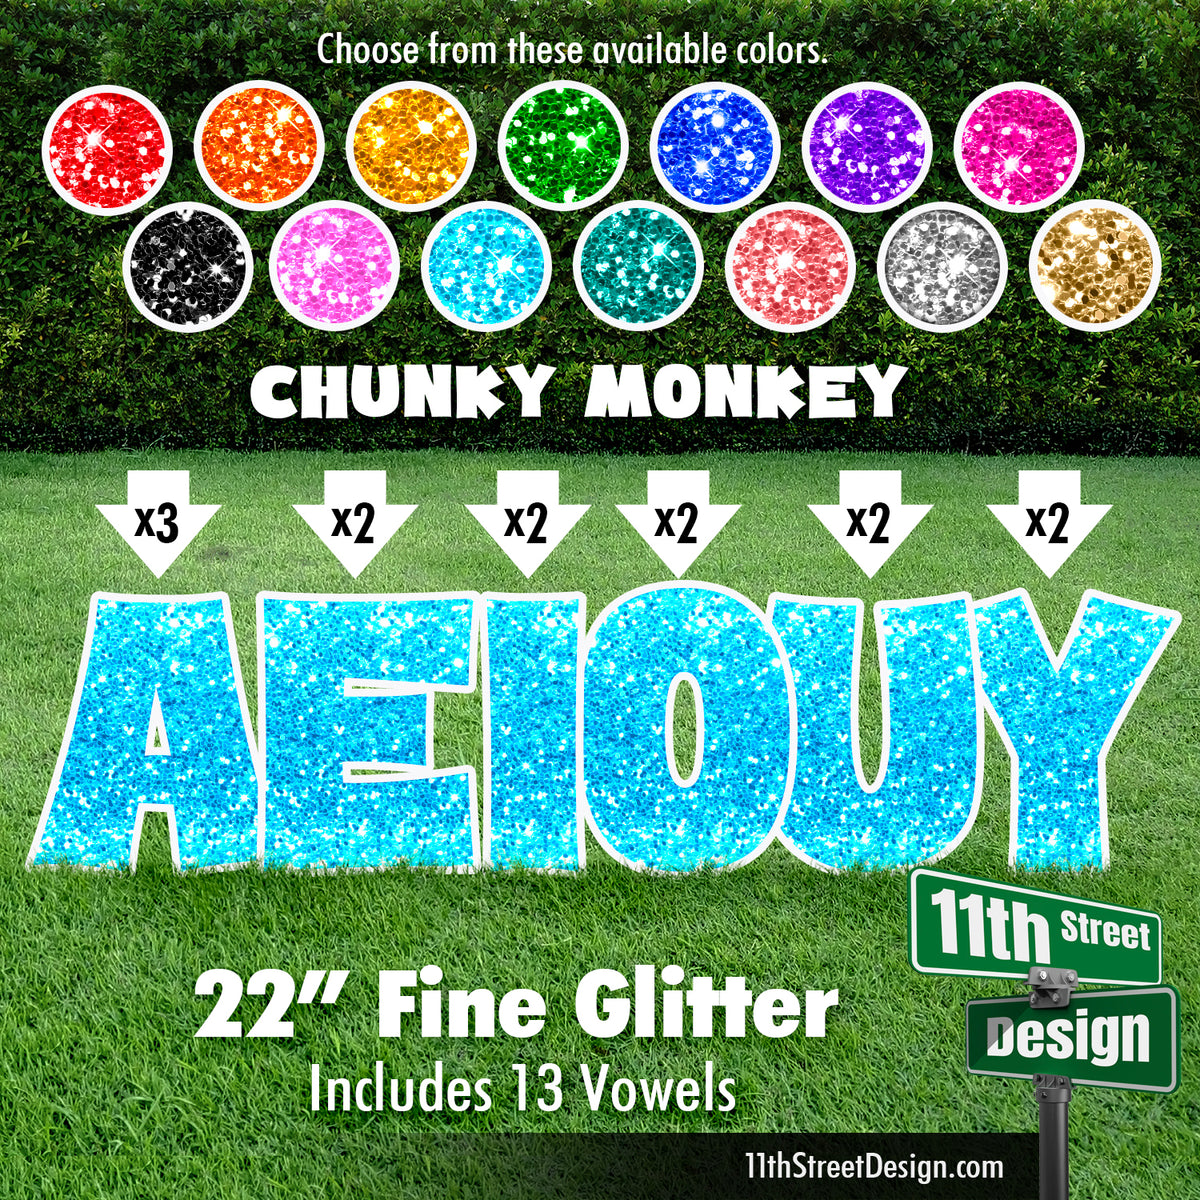 Fine Glitter 22&quot; Chunky Monkey Yard Card Set Includes 13 Vowels